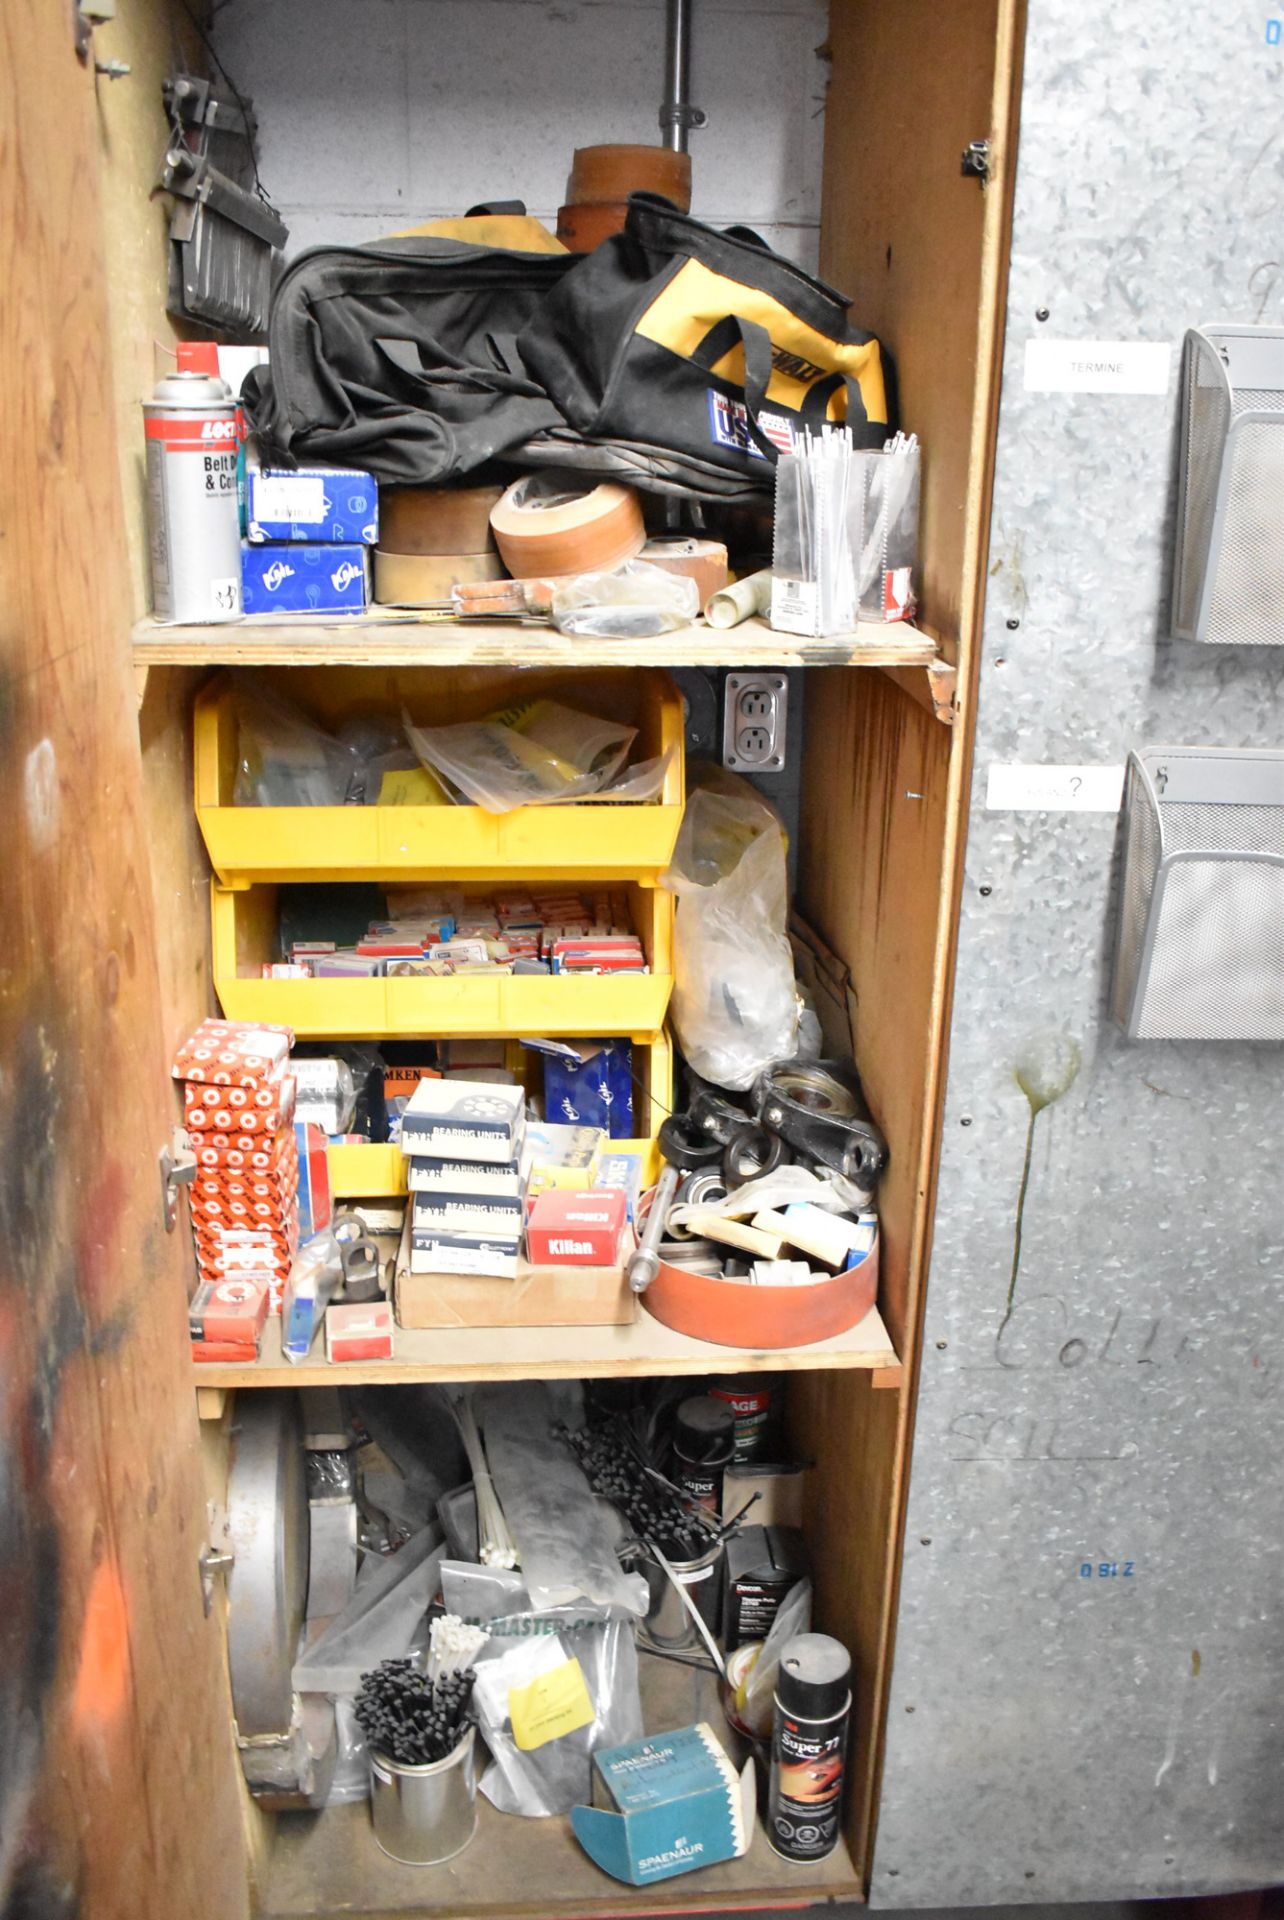 LOT/ STORAGE CABINETS WITH CONTENTS - SHOP SUPPLIES, CHEMICALS, HARDWARE, ELECTRICAL COMPONENTS, - Image 2 of 7